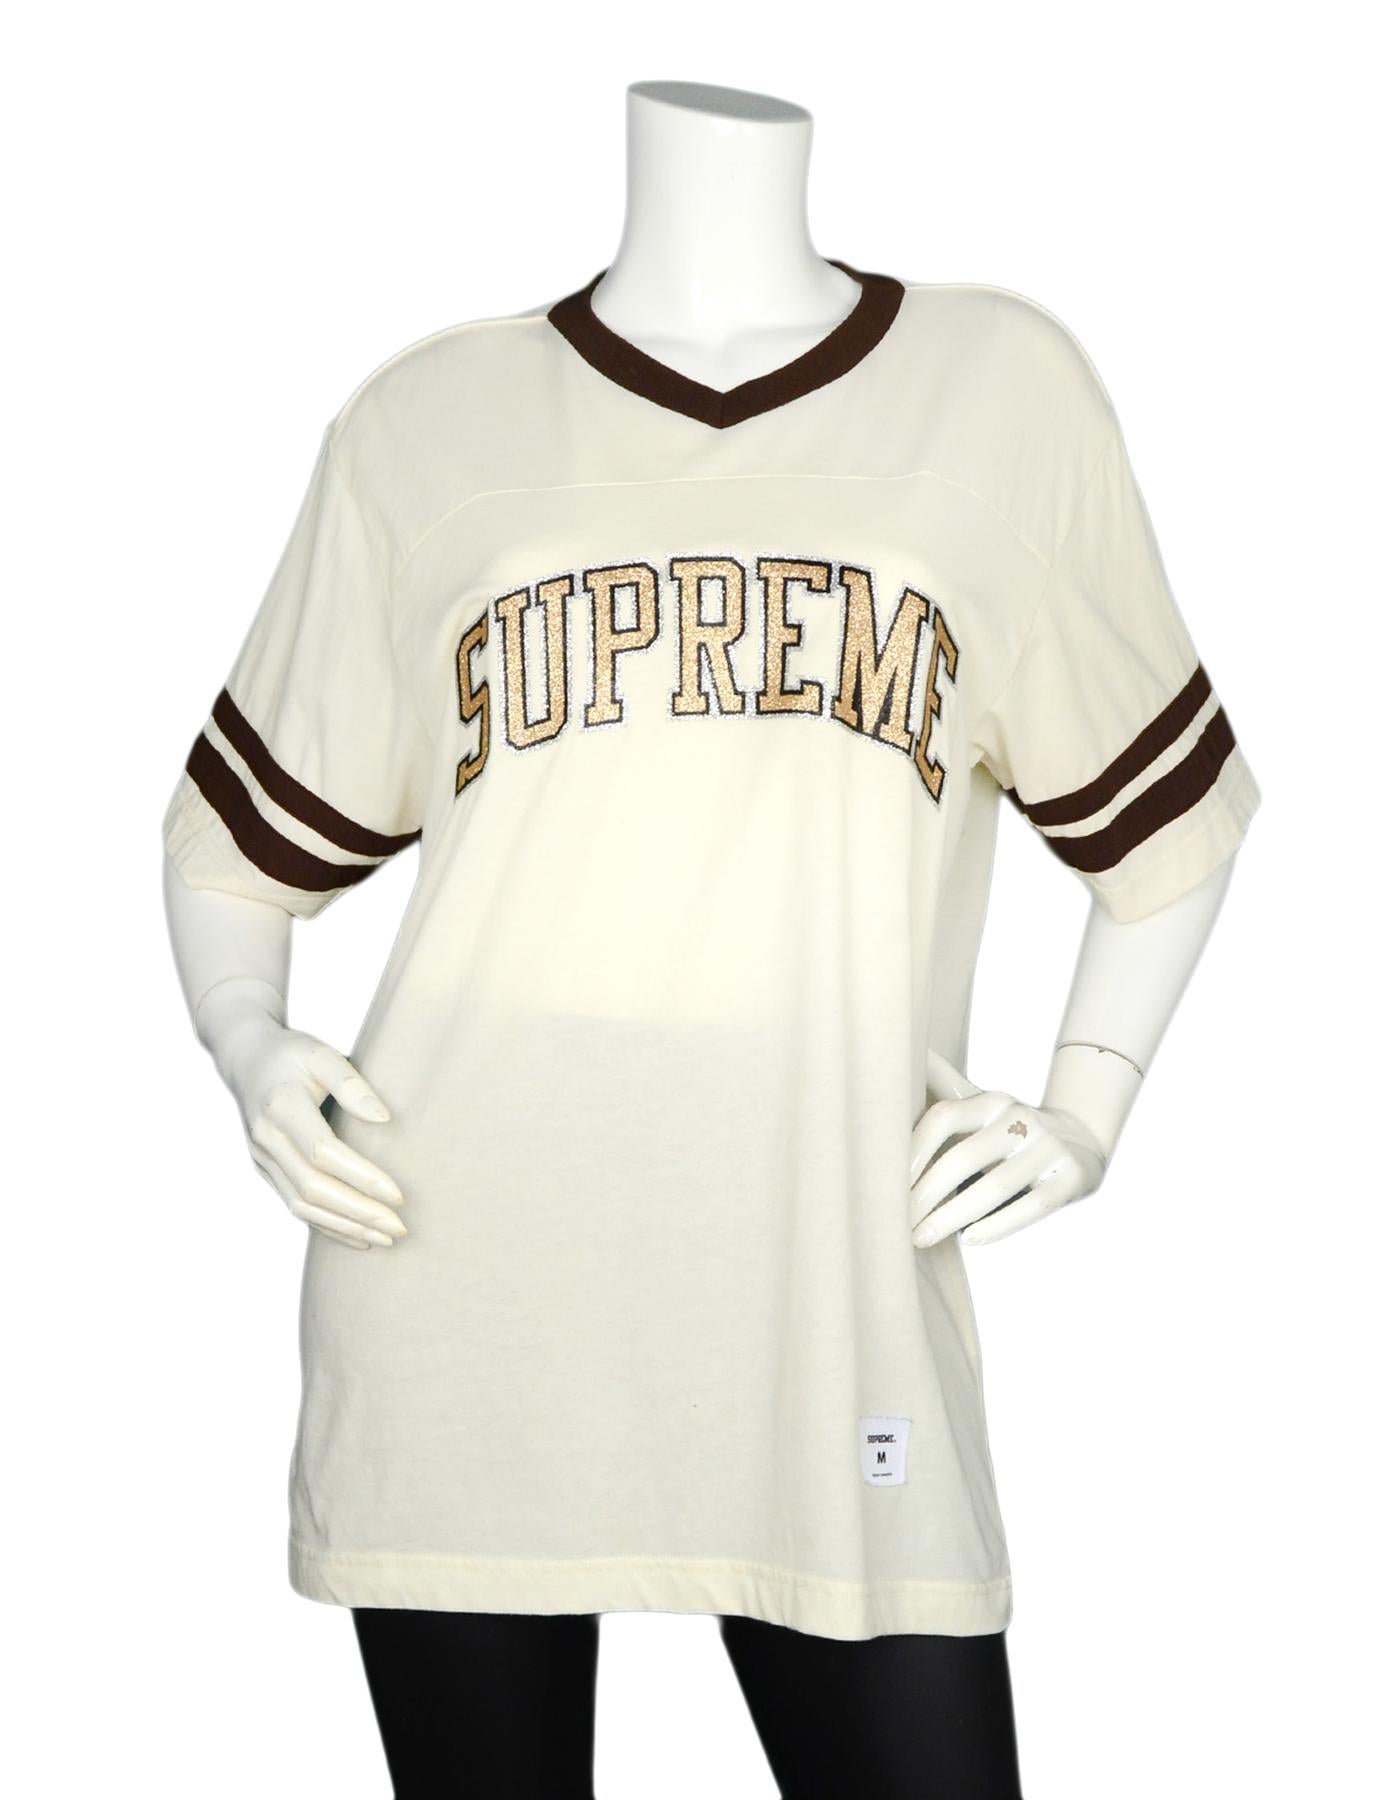 Supreme Men's Beige Glitter Logo Arc Football T-Shirt Sz M

Made In: China 
Color: Beige/brown, gold/silver/black
Materials: 60% cotton, 40% polyester
Opening/Closure: Pull over
Overall Condition: Excellent pre-owned condition
Measurements: